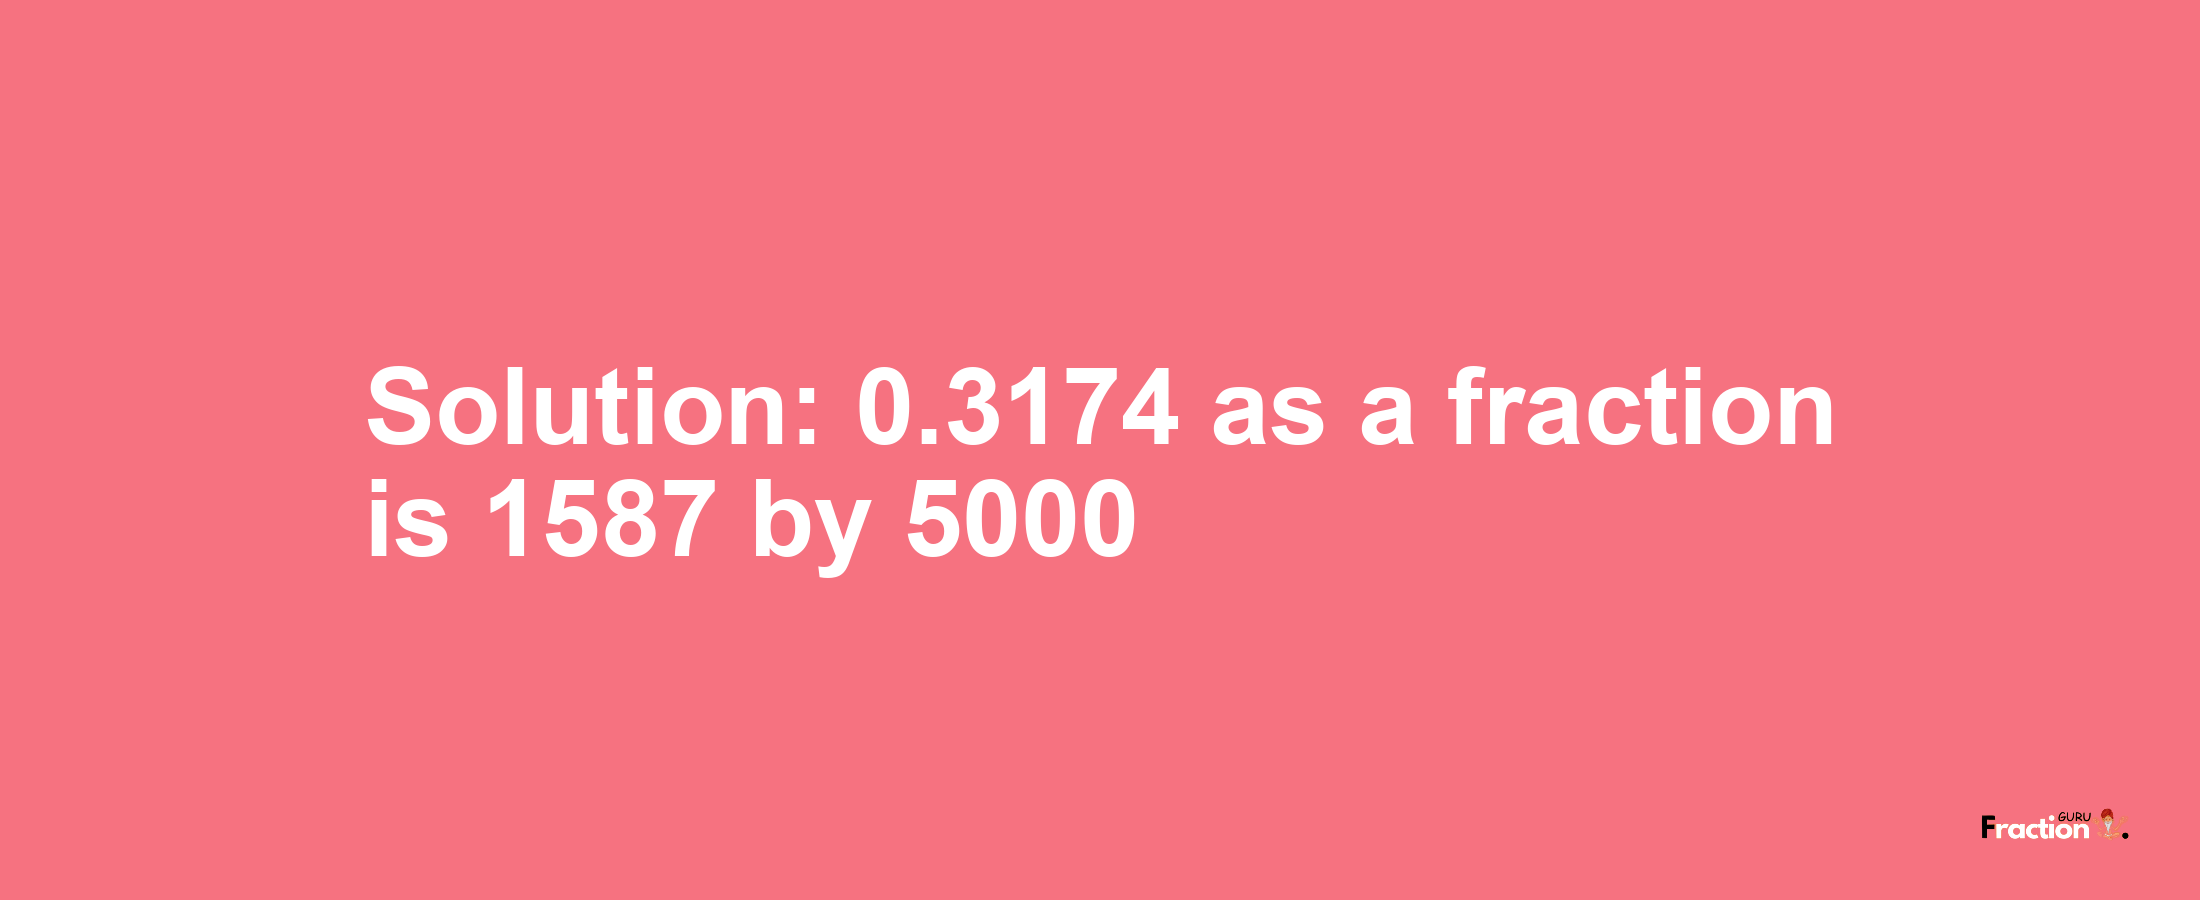 Solution:0.3174 as a fraction is 1587/5000